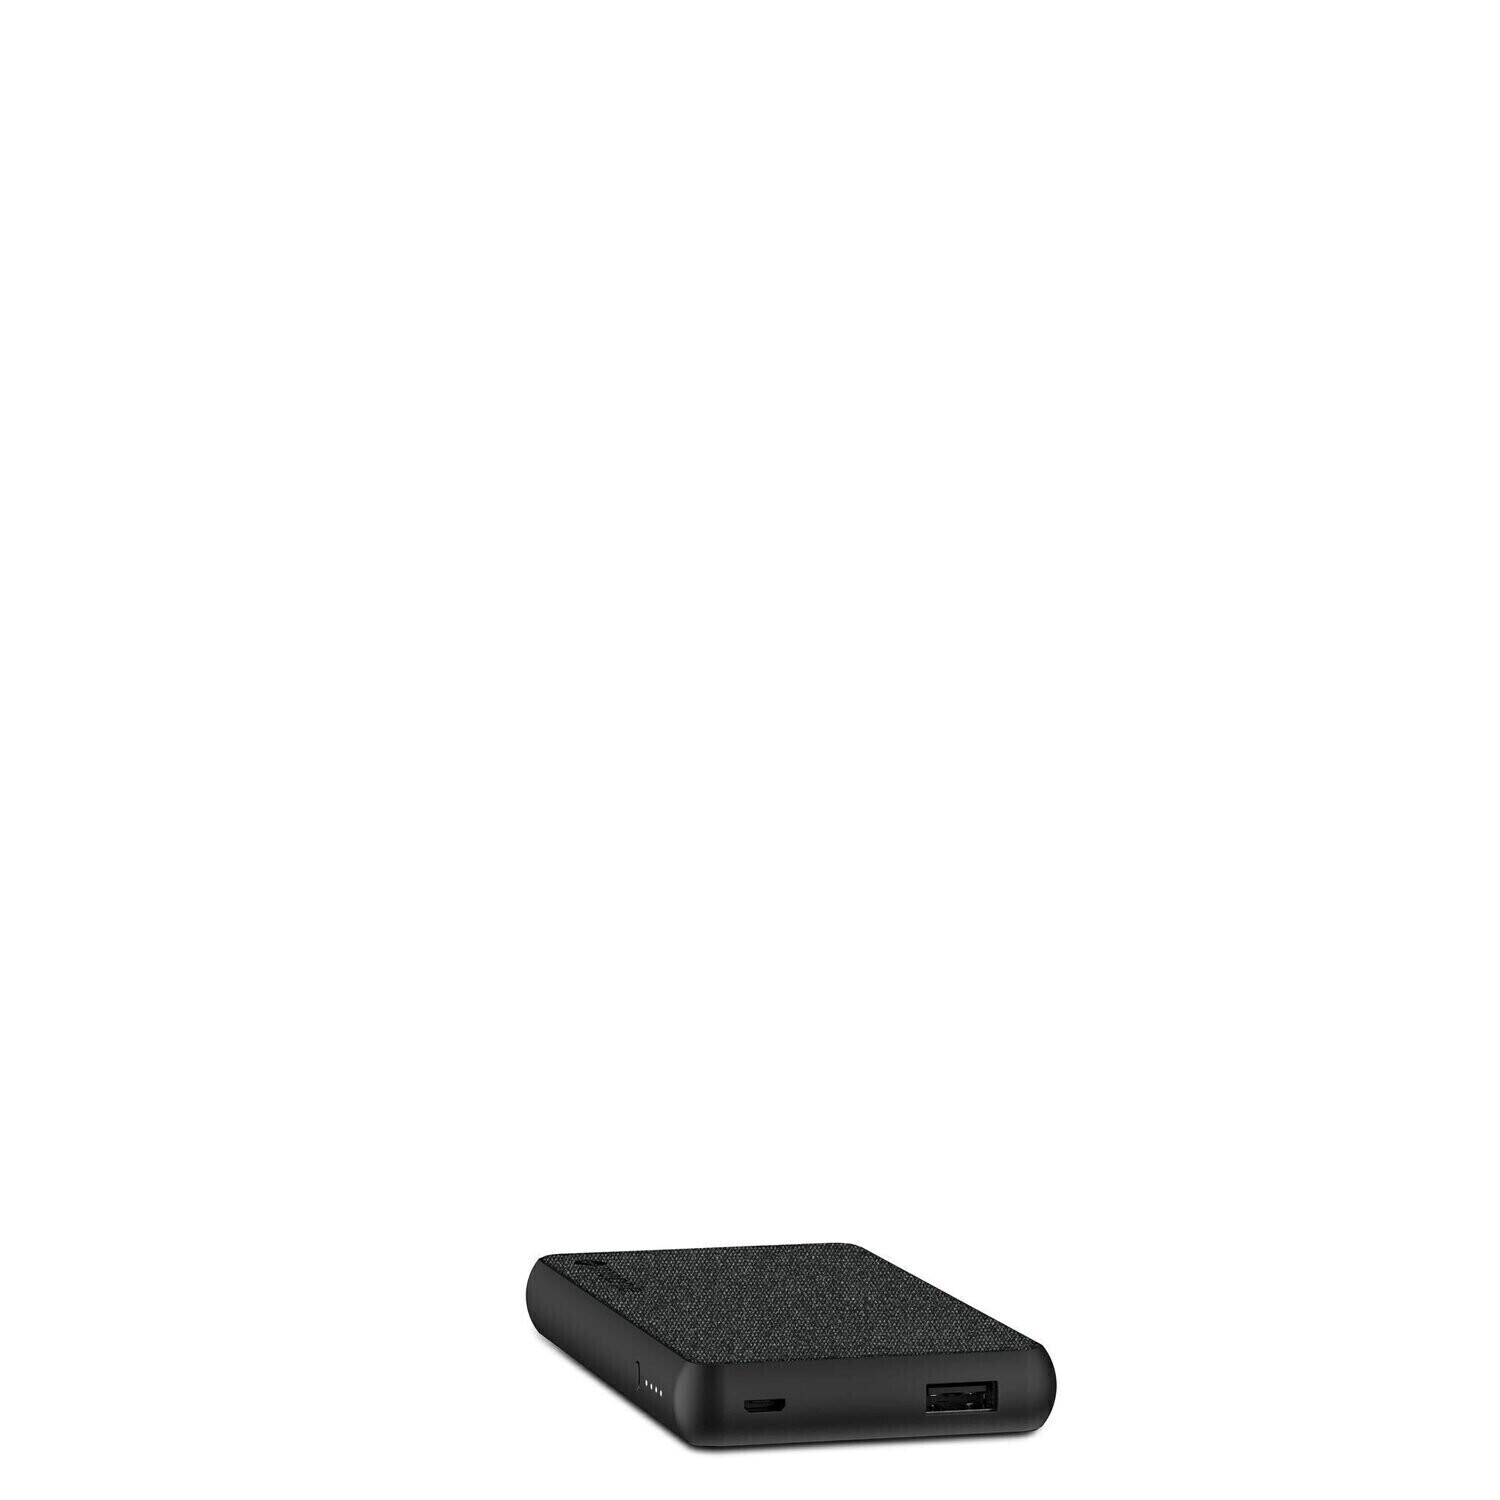 Mophie Powerstation Plus External Battery Switch-Tip-Cable (6,000mAh) (G4), Black